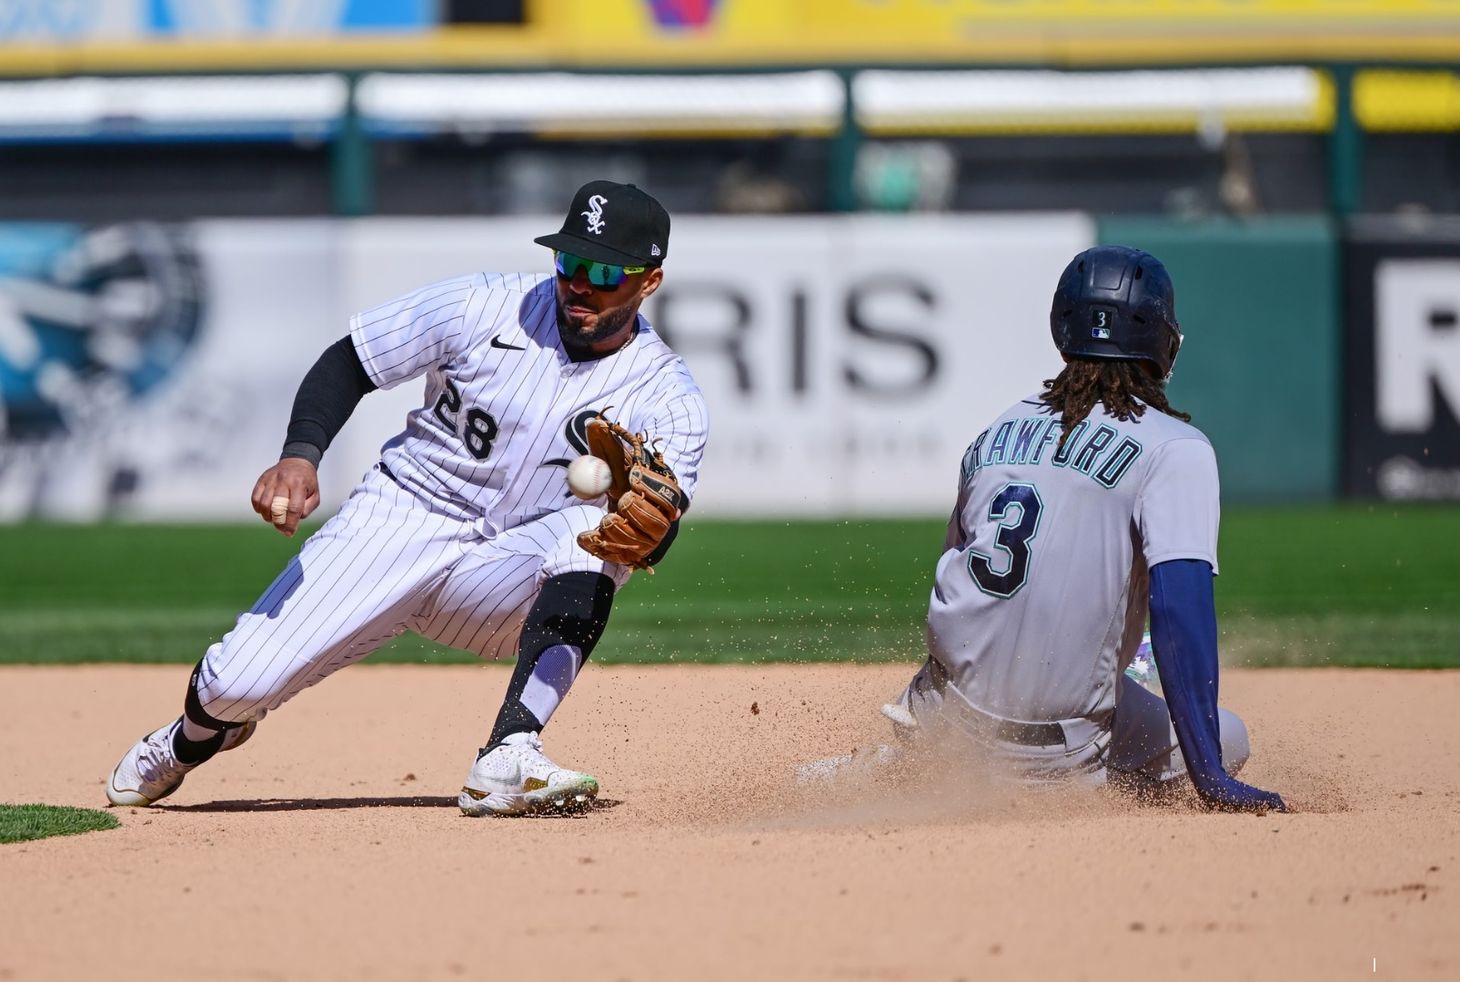 Mariners beat White Sox 5-1 in Windy City